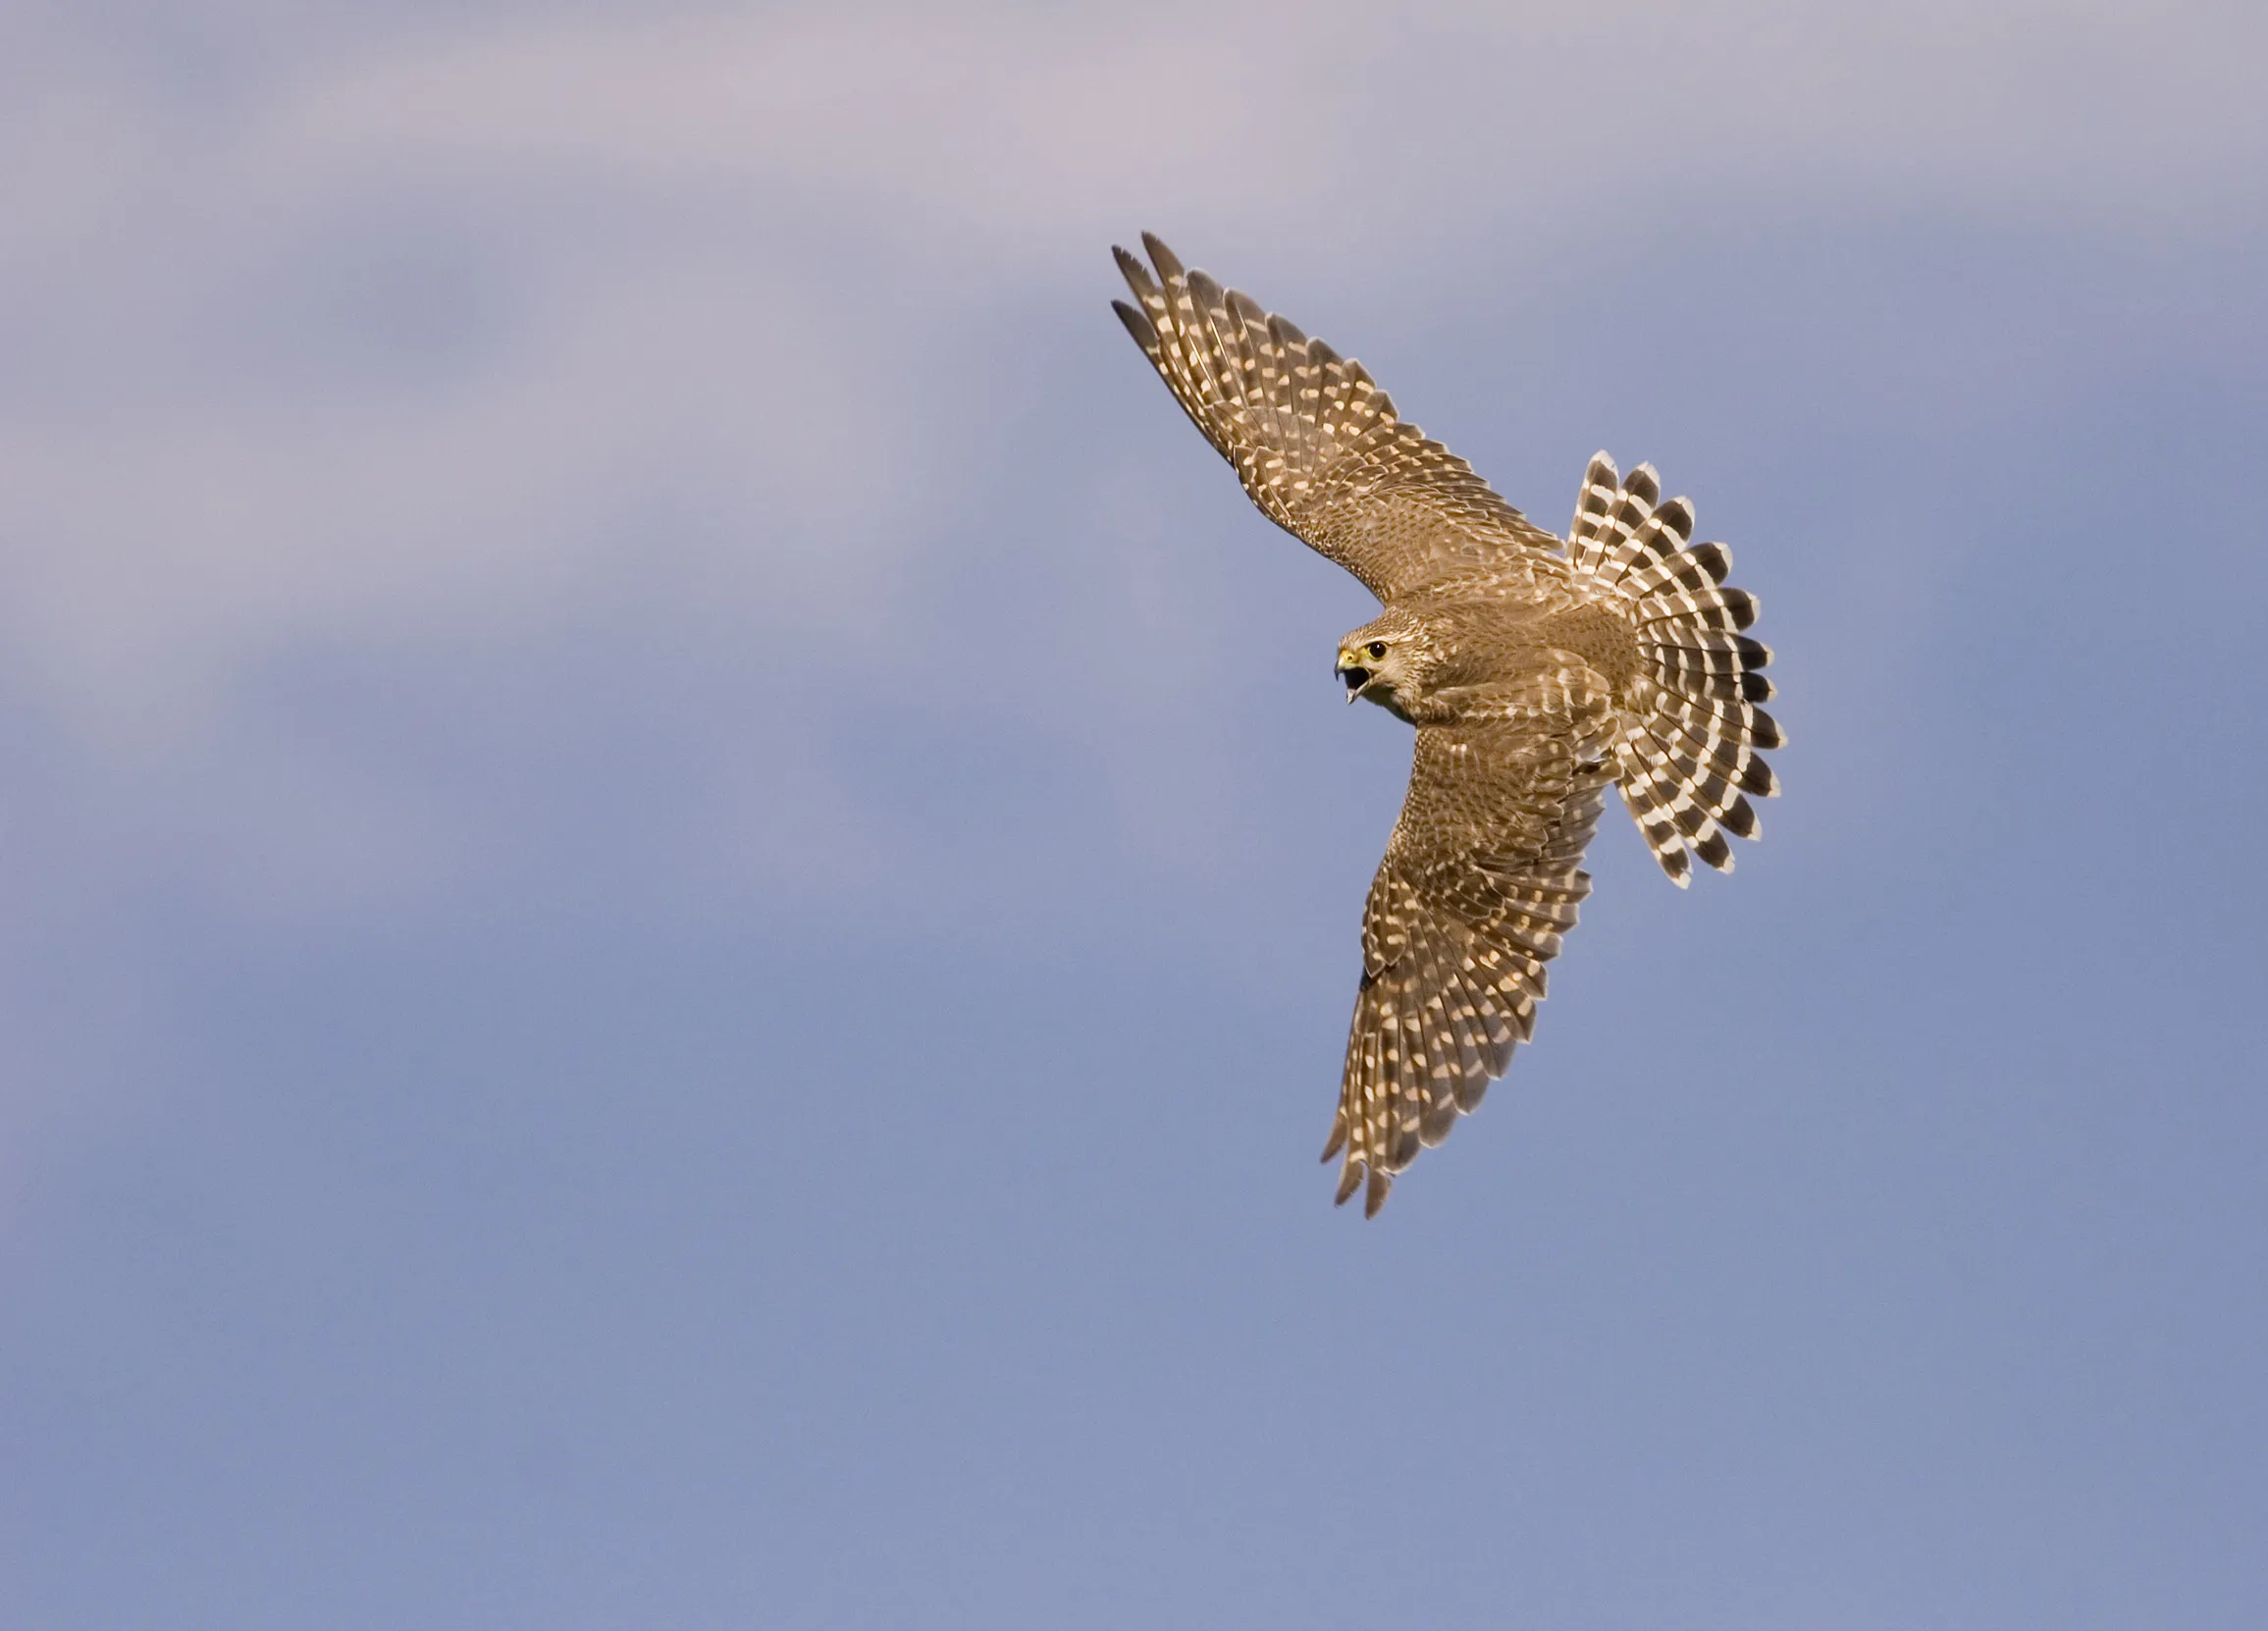 A juvenile female Merlin soring in the sky above, wings splayed.